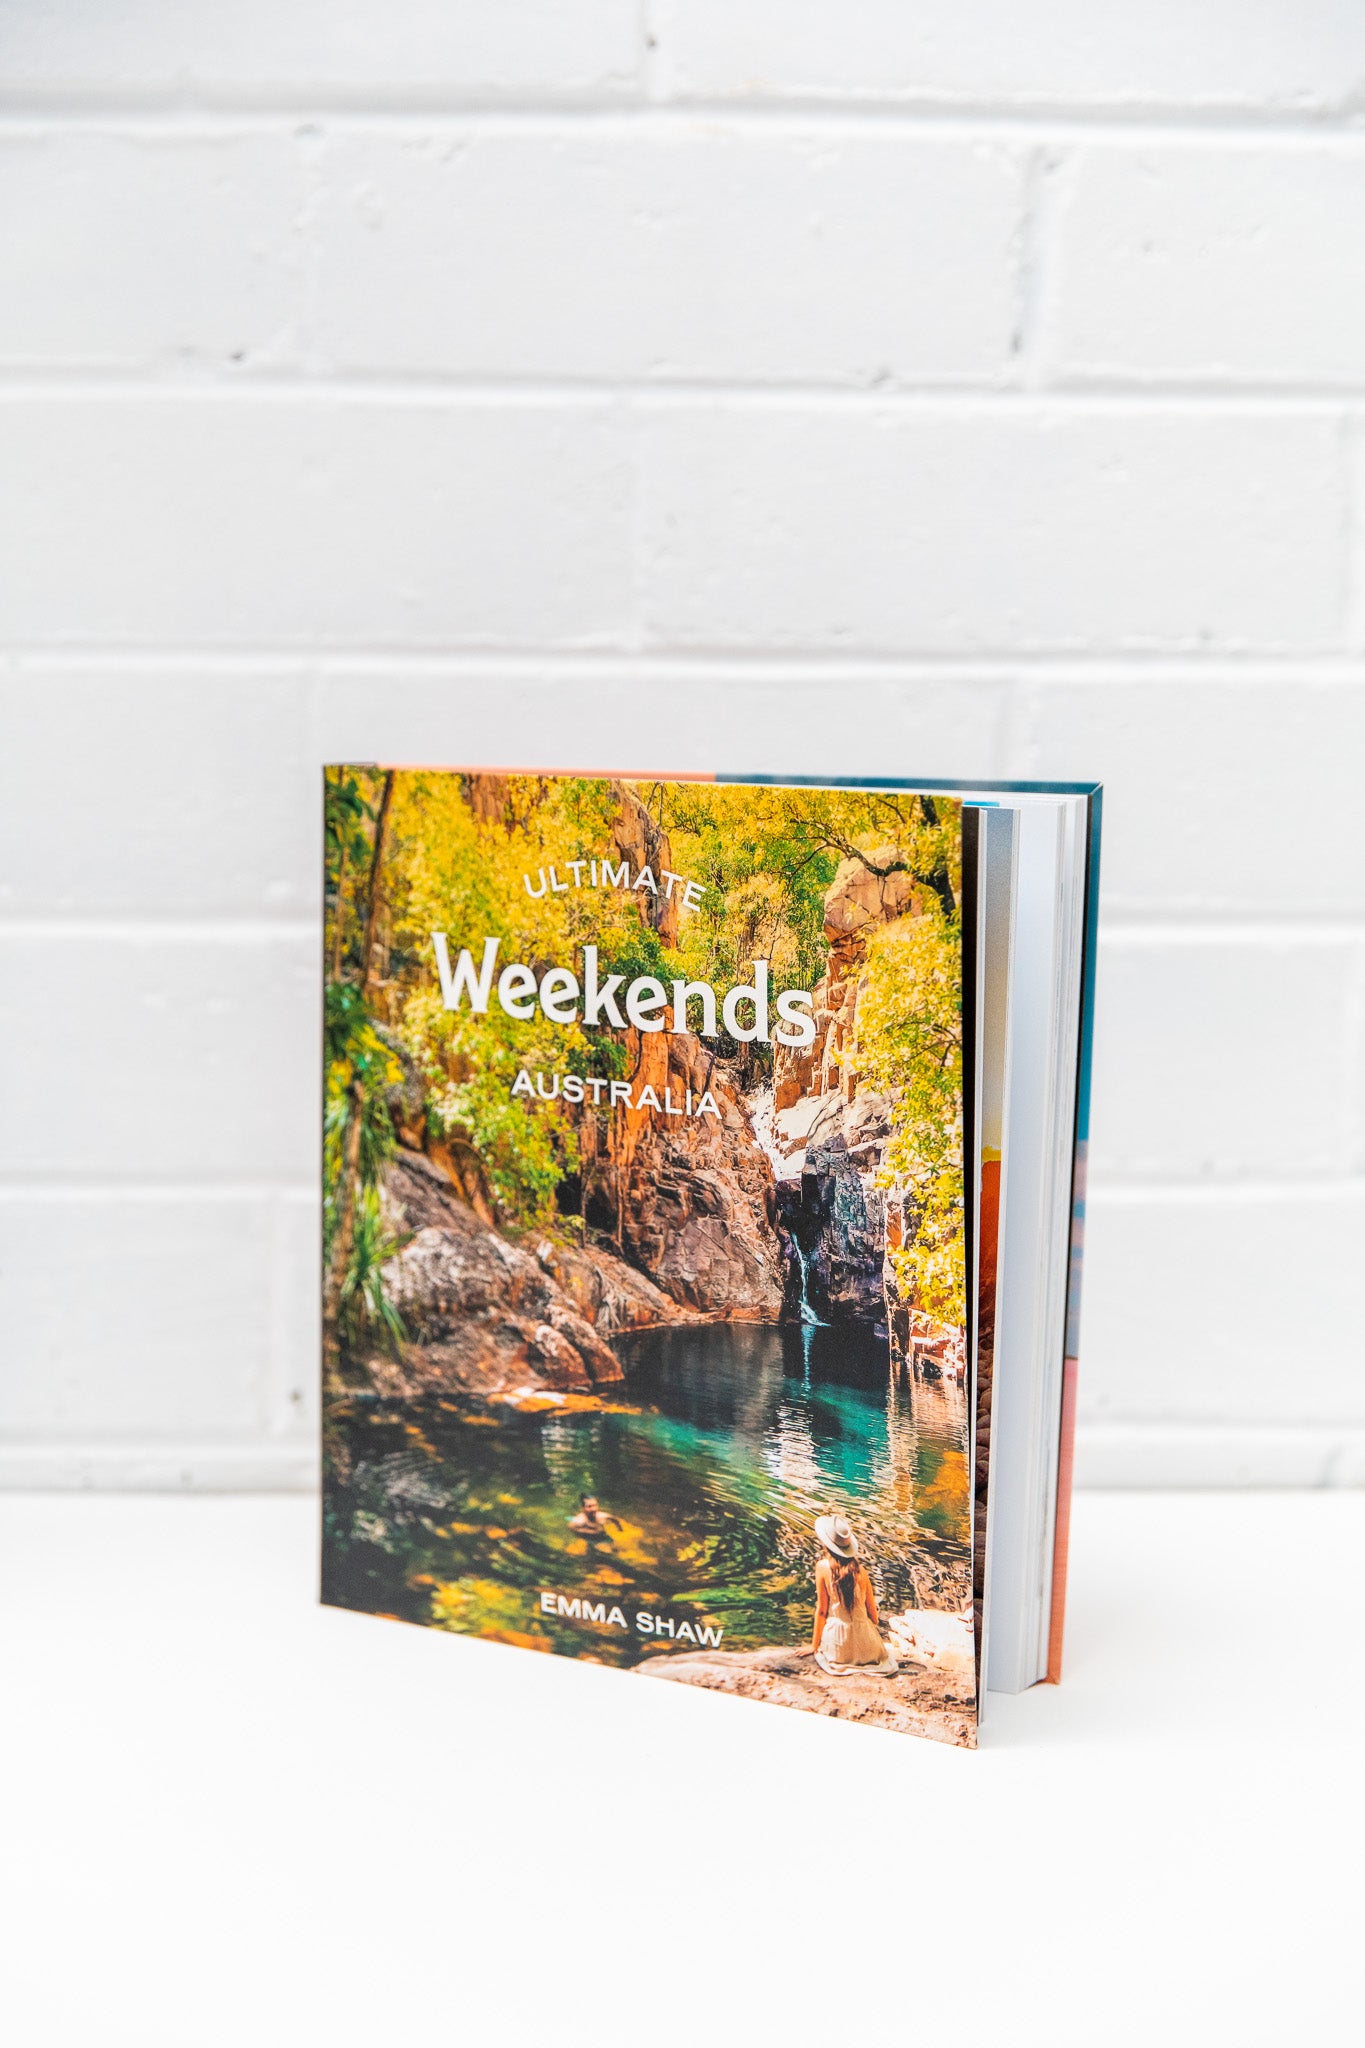 Camping/Outdoor Hardcover Book